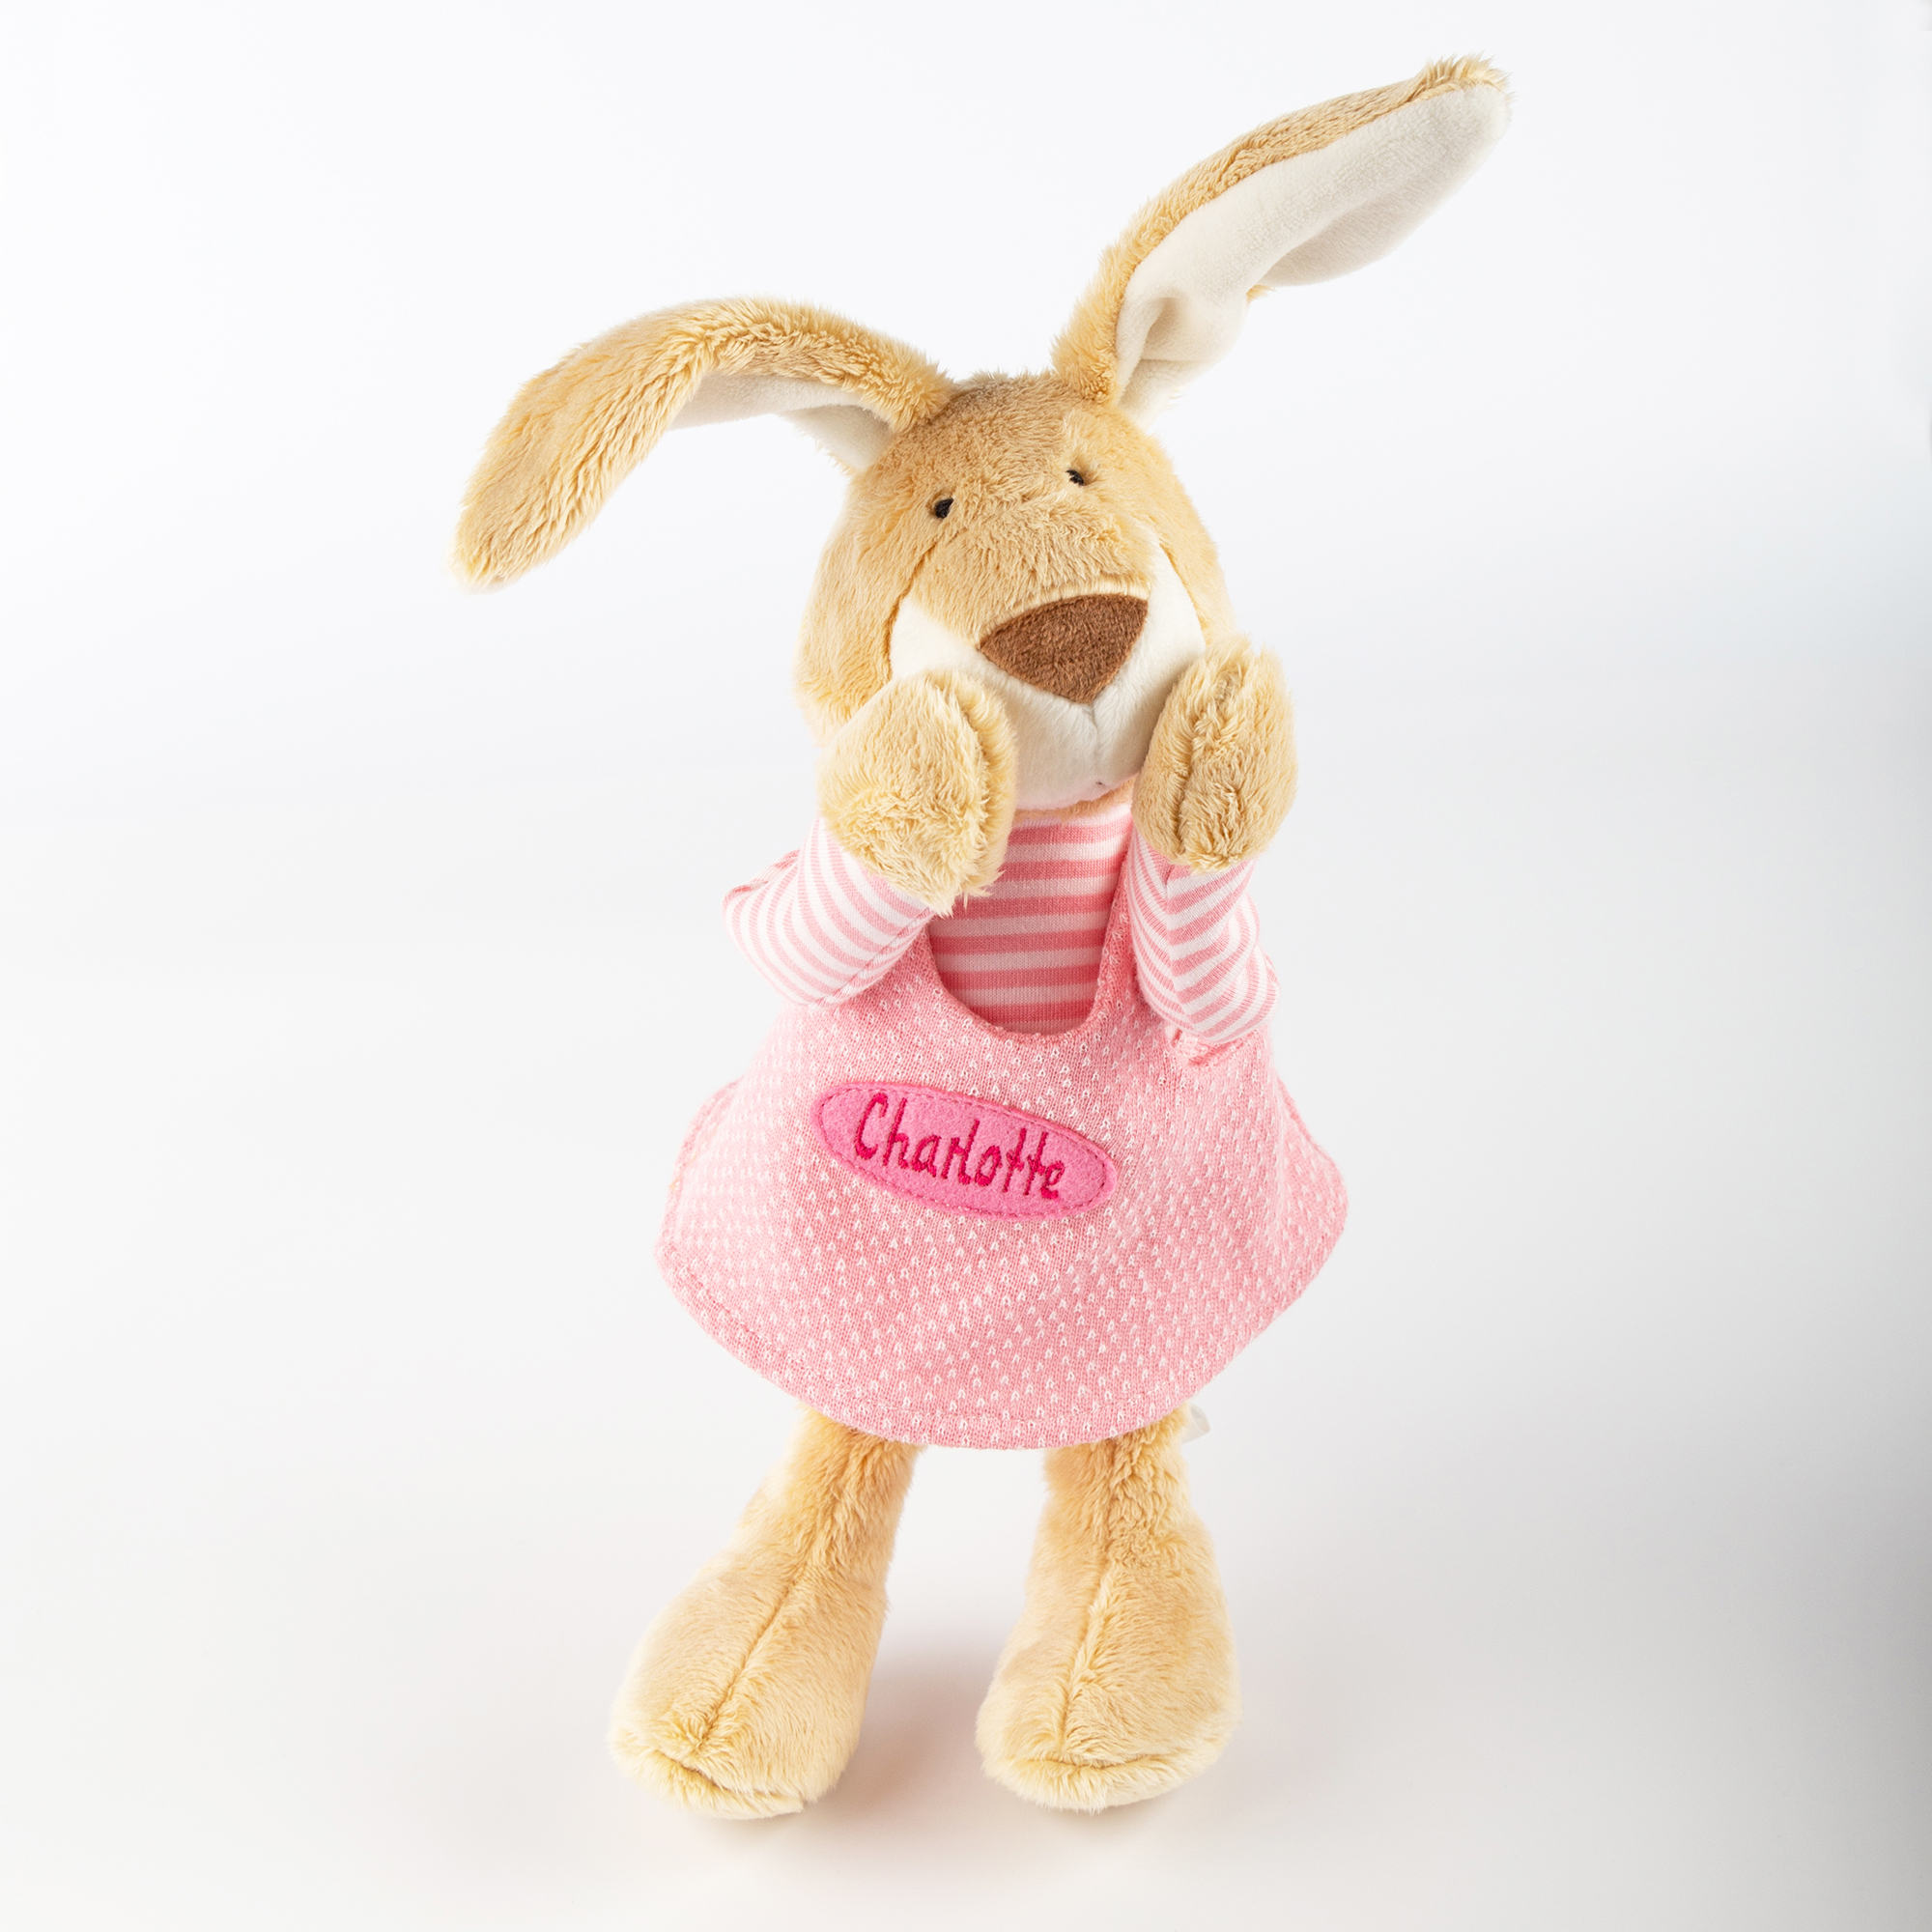 Customized soft toy bunny, pink